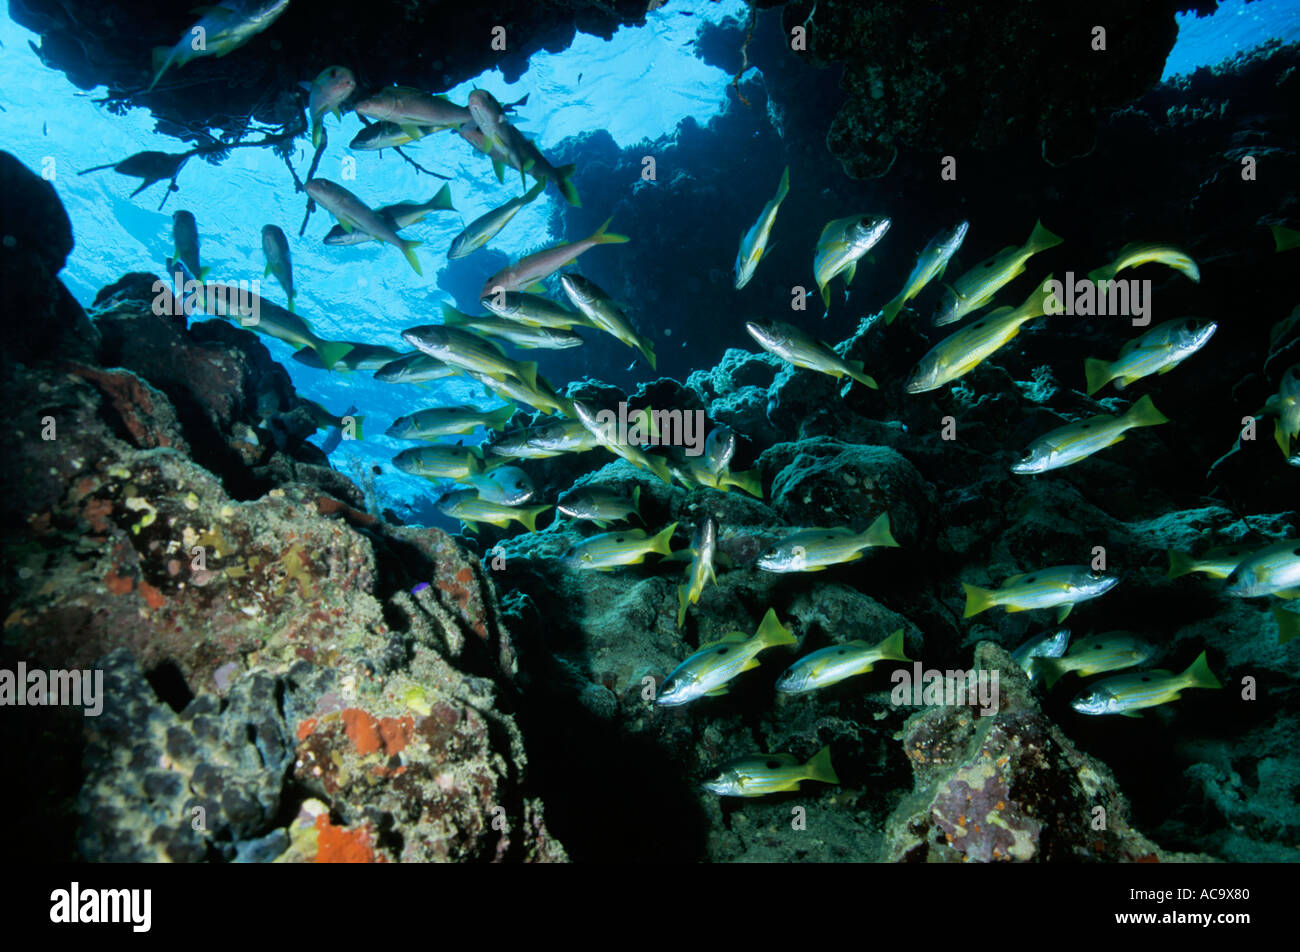 Egypt Red Sea Gotta Wadi Gamel Reef School Of Fishes Inside A Cave Stock Photo